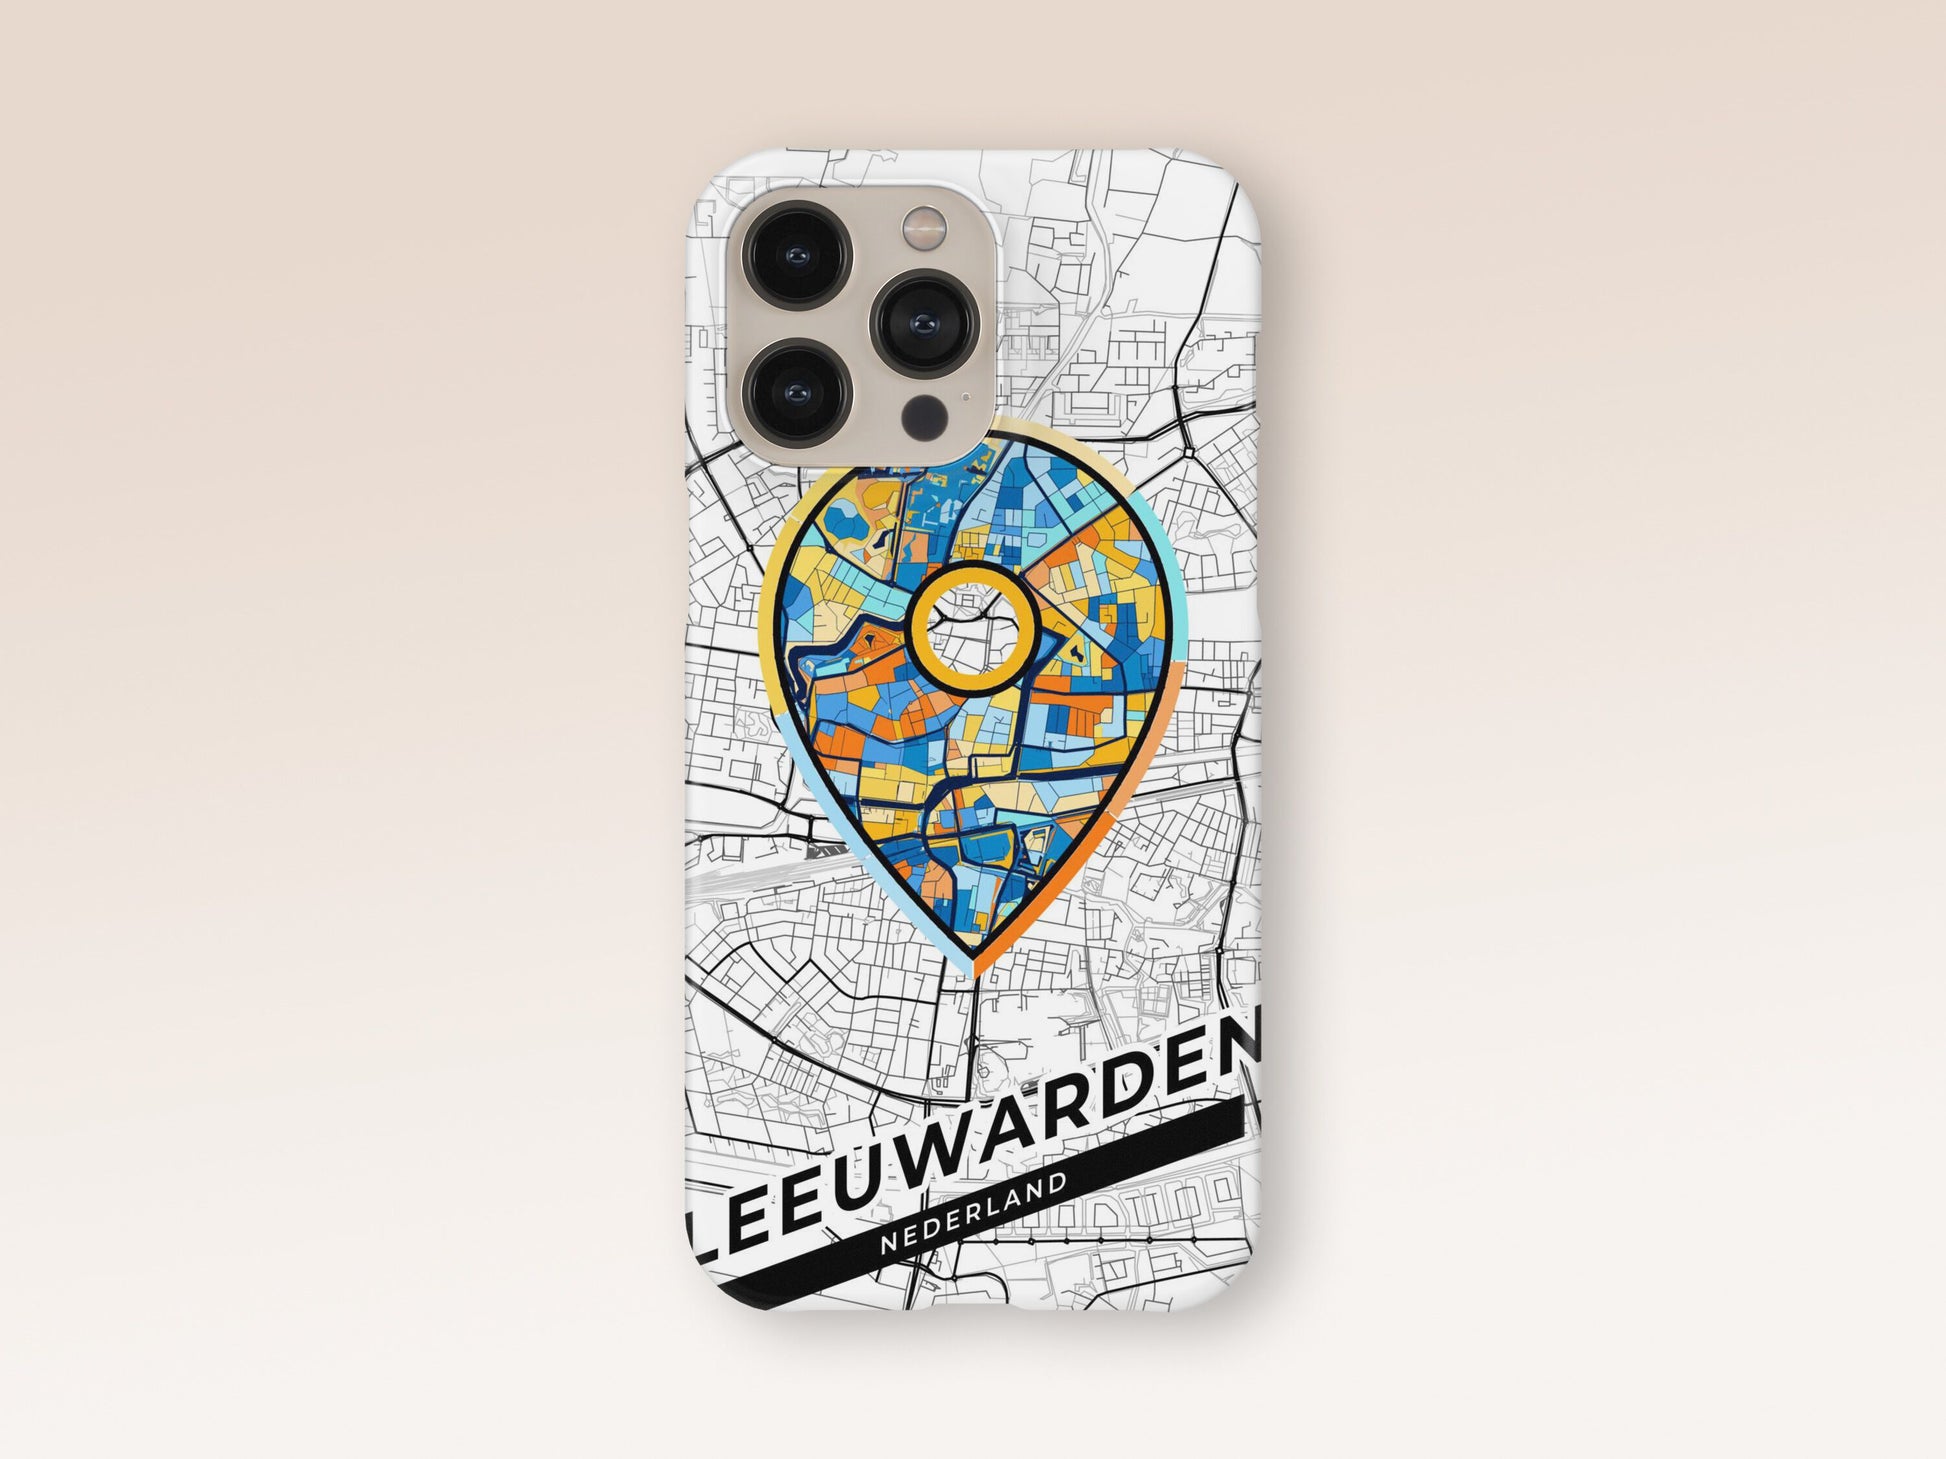 Leeuwarden Netherlands slim phone case with colorful icon. Birthday, wedding or housewarming gift. Couple match cases. 1